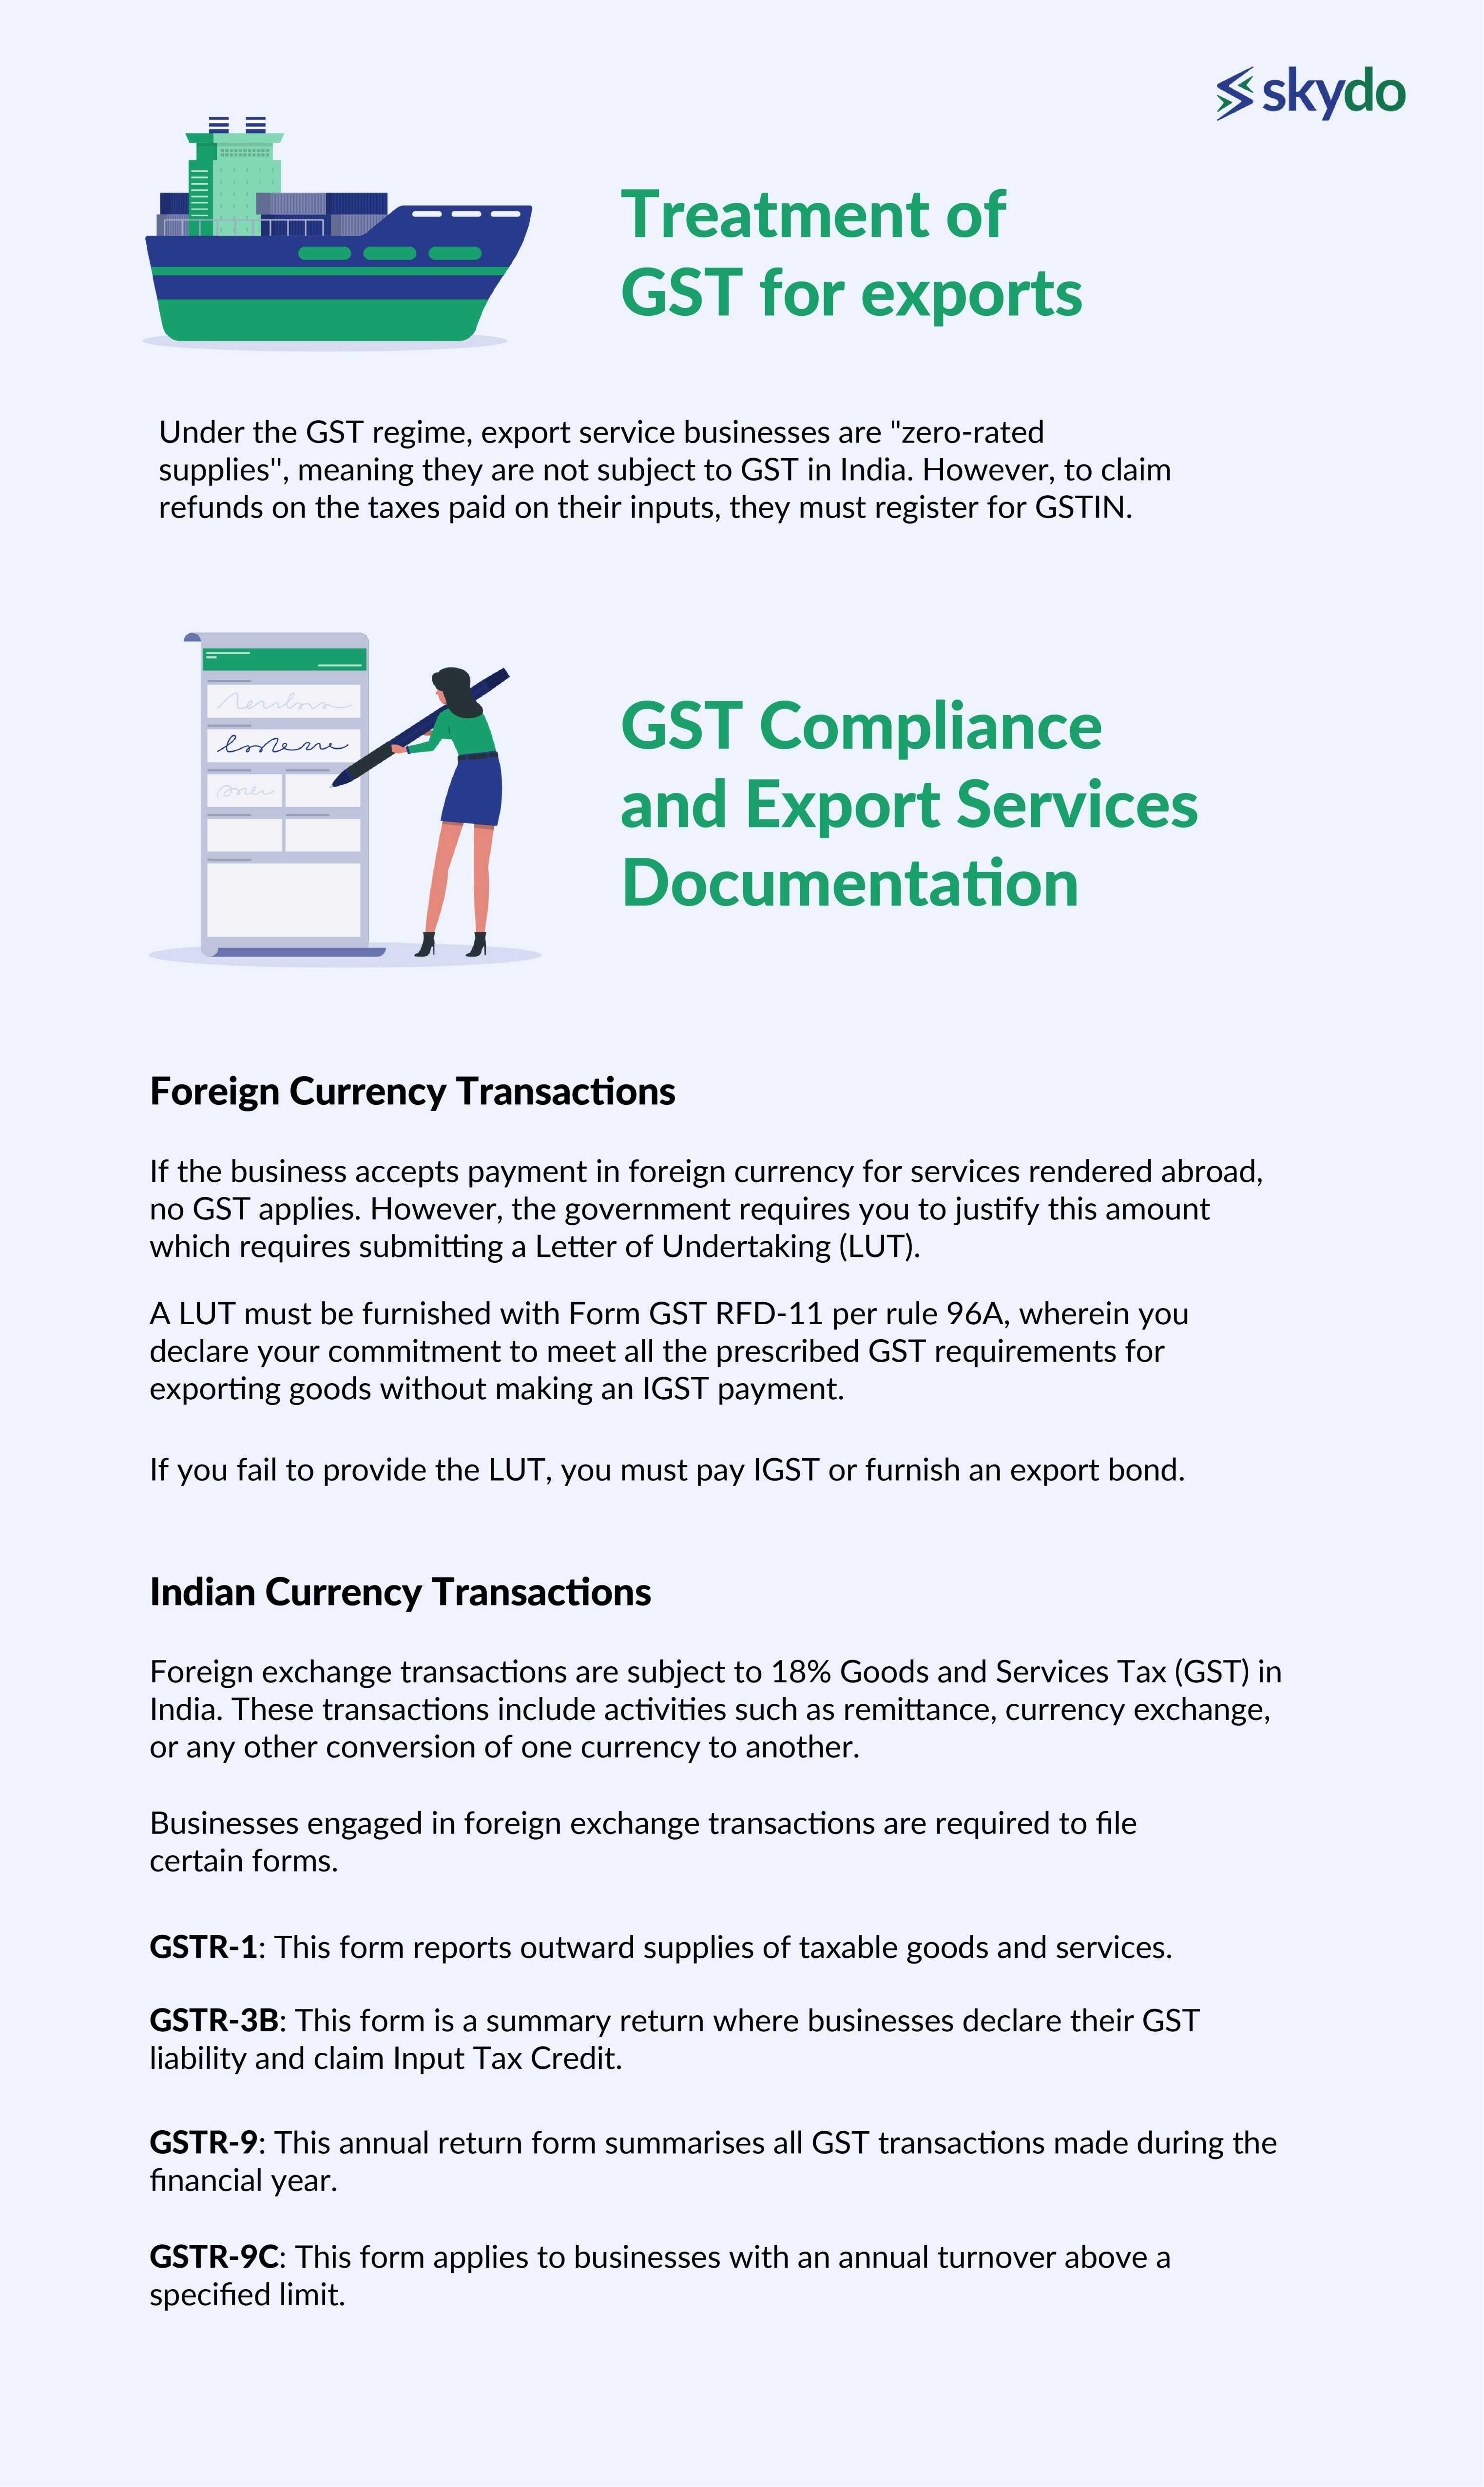 Treatment of GST for Exports